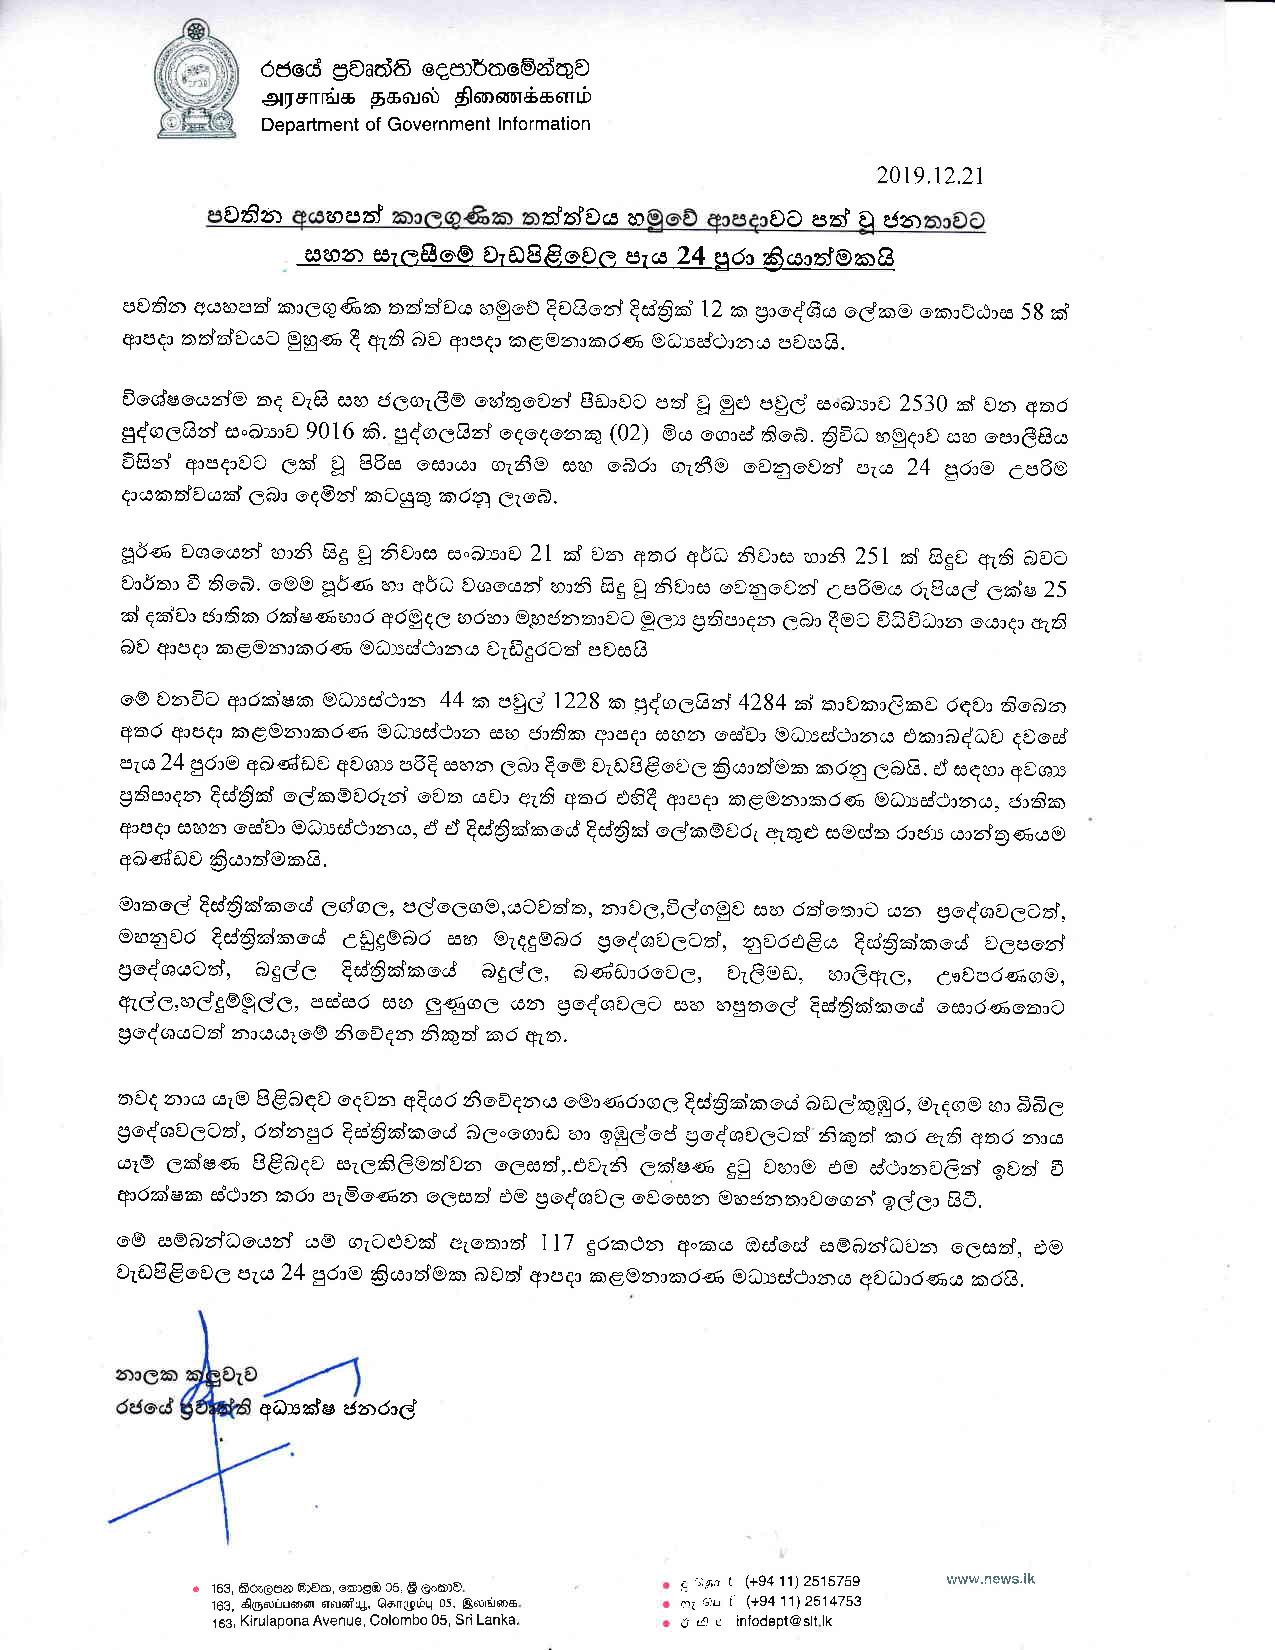 Media Release on 21.12.2019 page 001